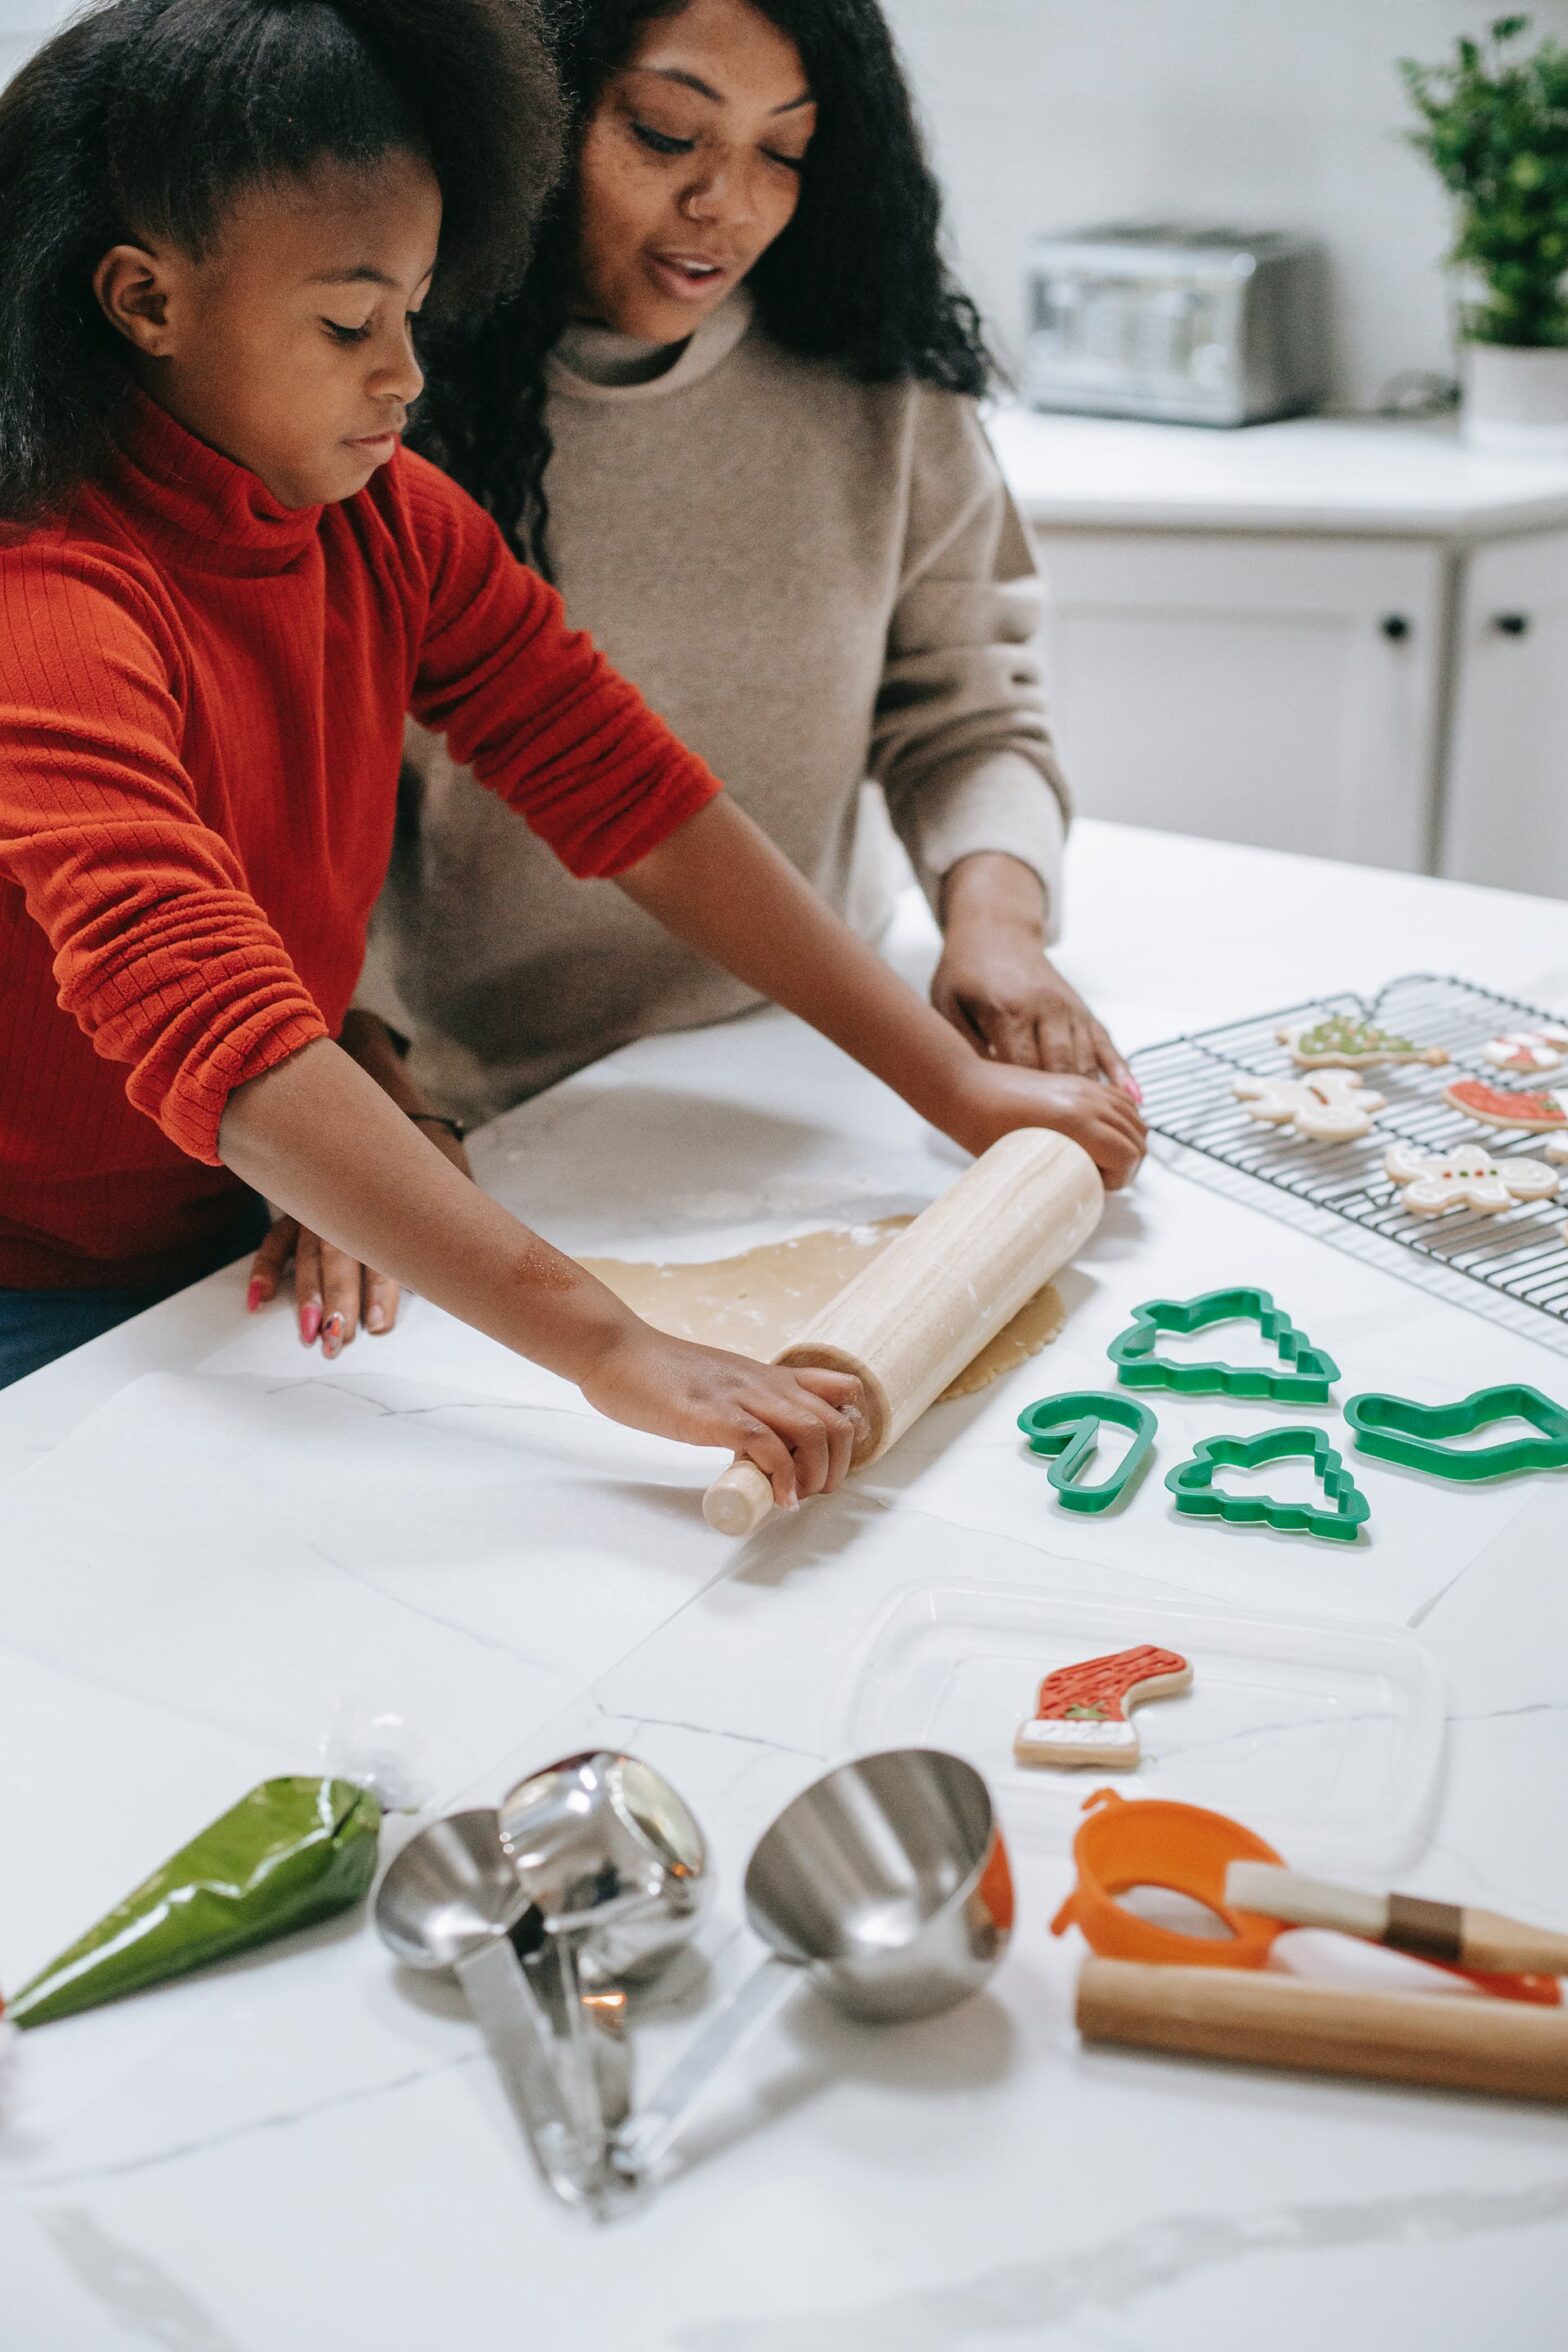 A mom and daughter roll cookies; family time bonding